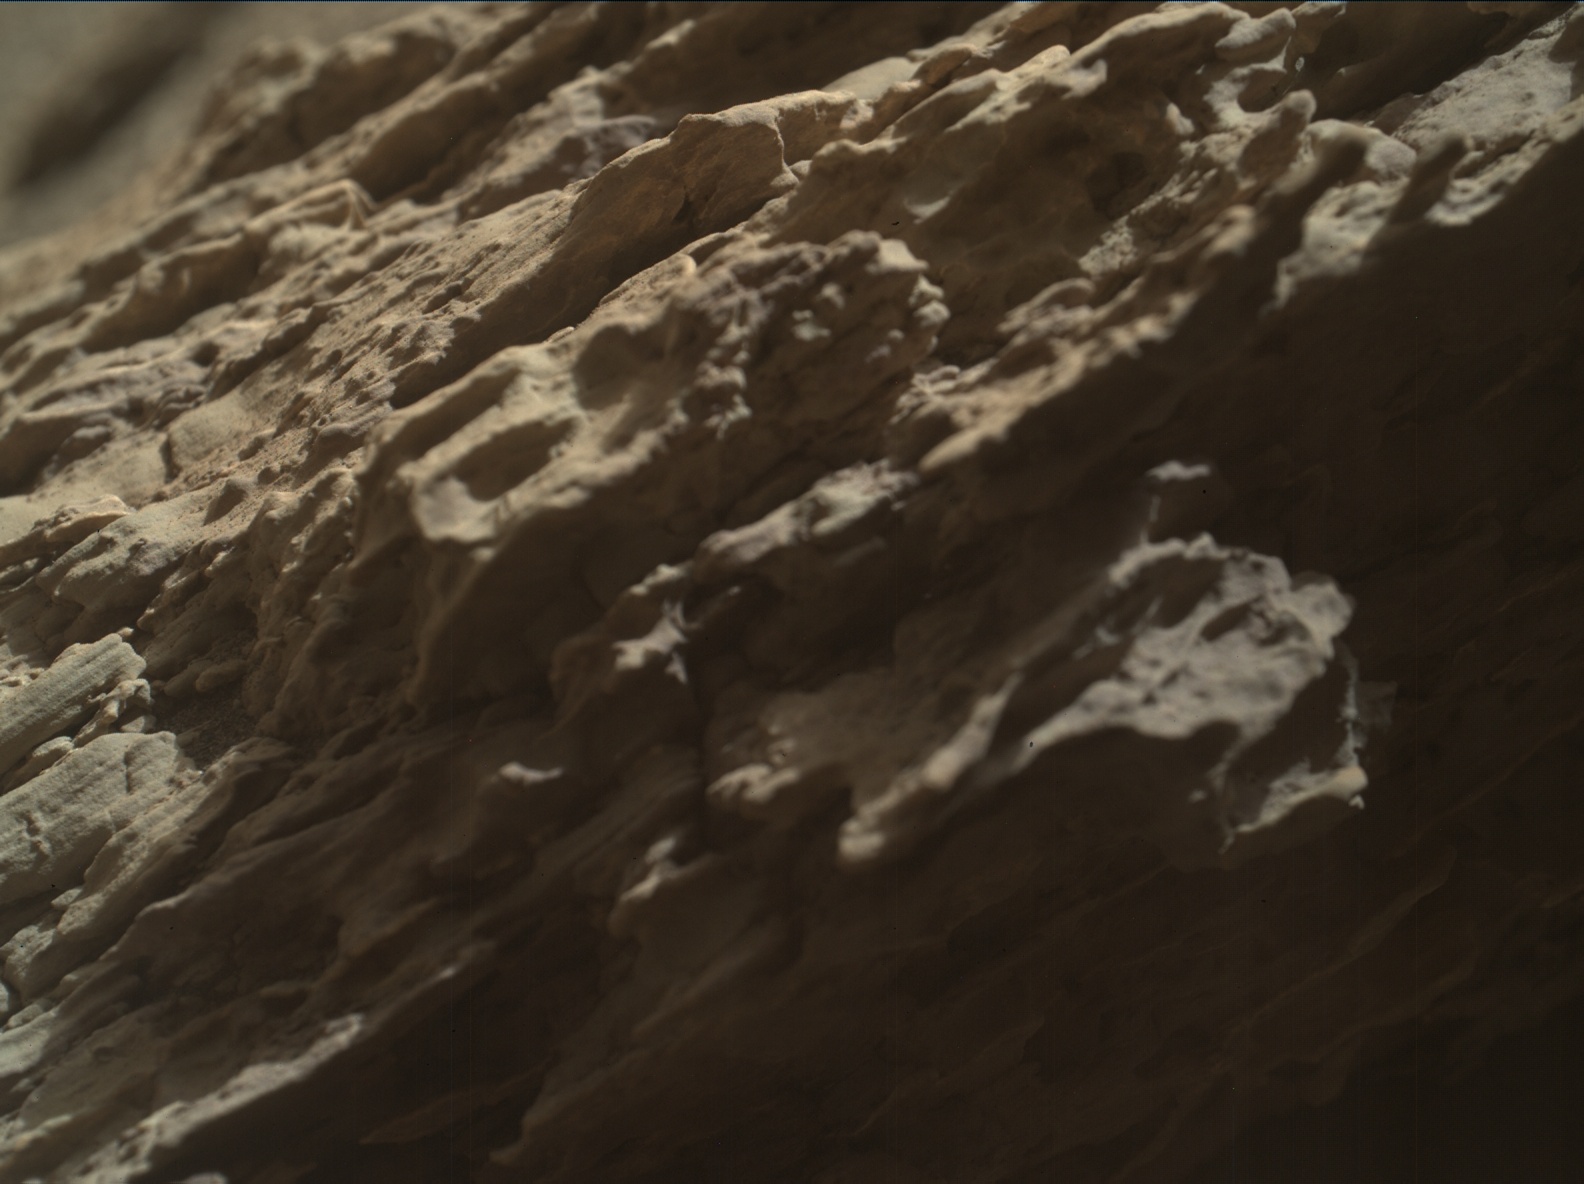 Nasa's Mars rover Curiosity acquired this image using its Mars Hand Lens Imager (MAHLI) on Sol 2608